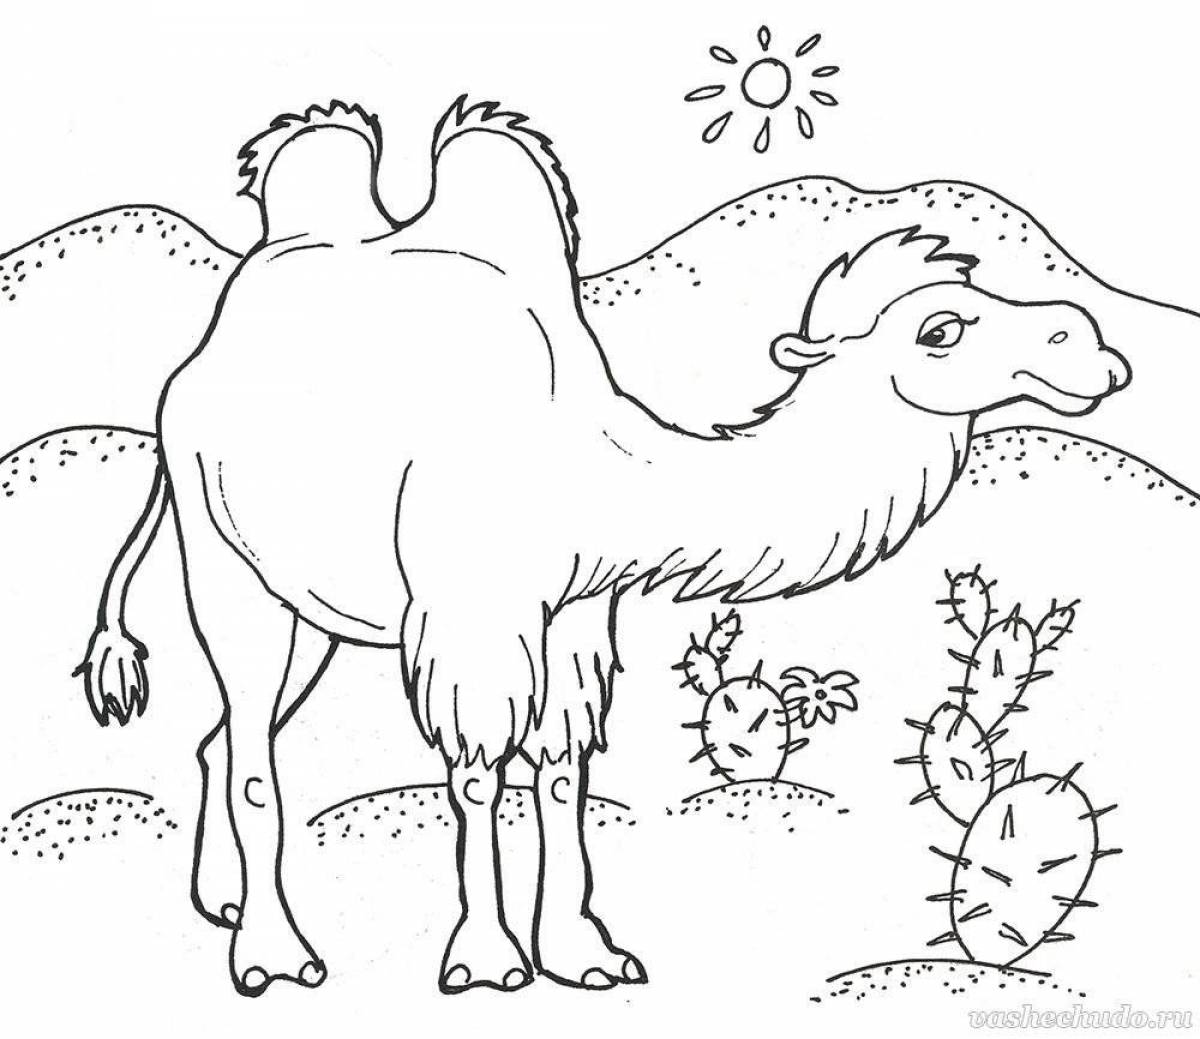 Crazy animal coloring pages for 5-6 year olds